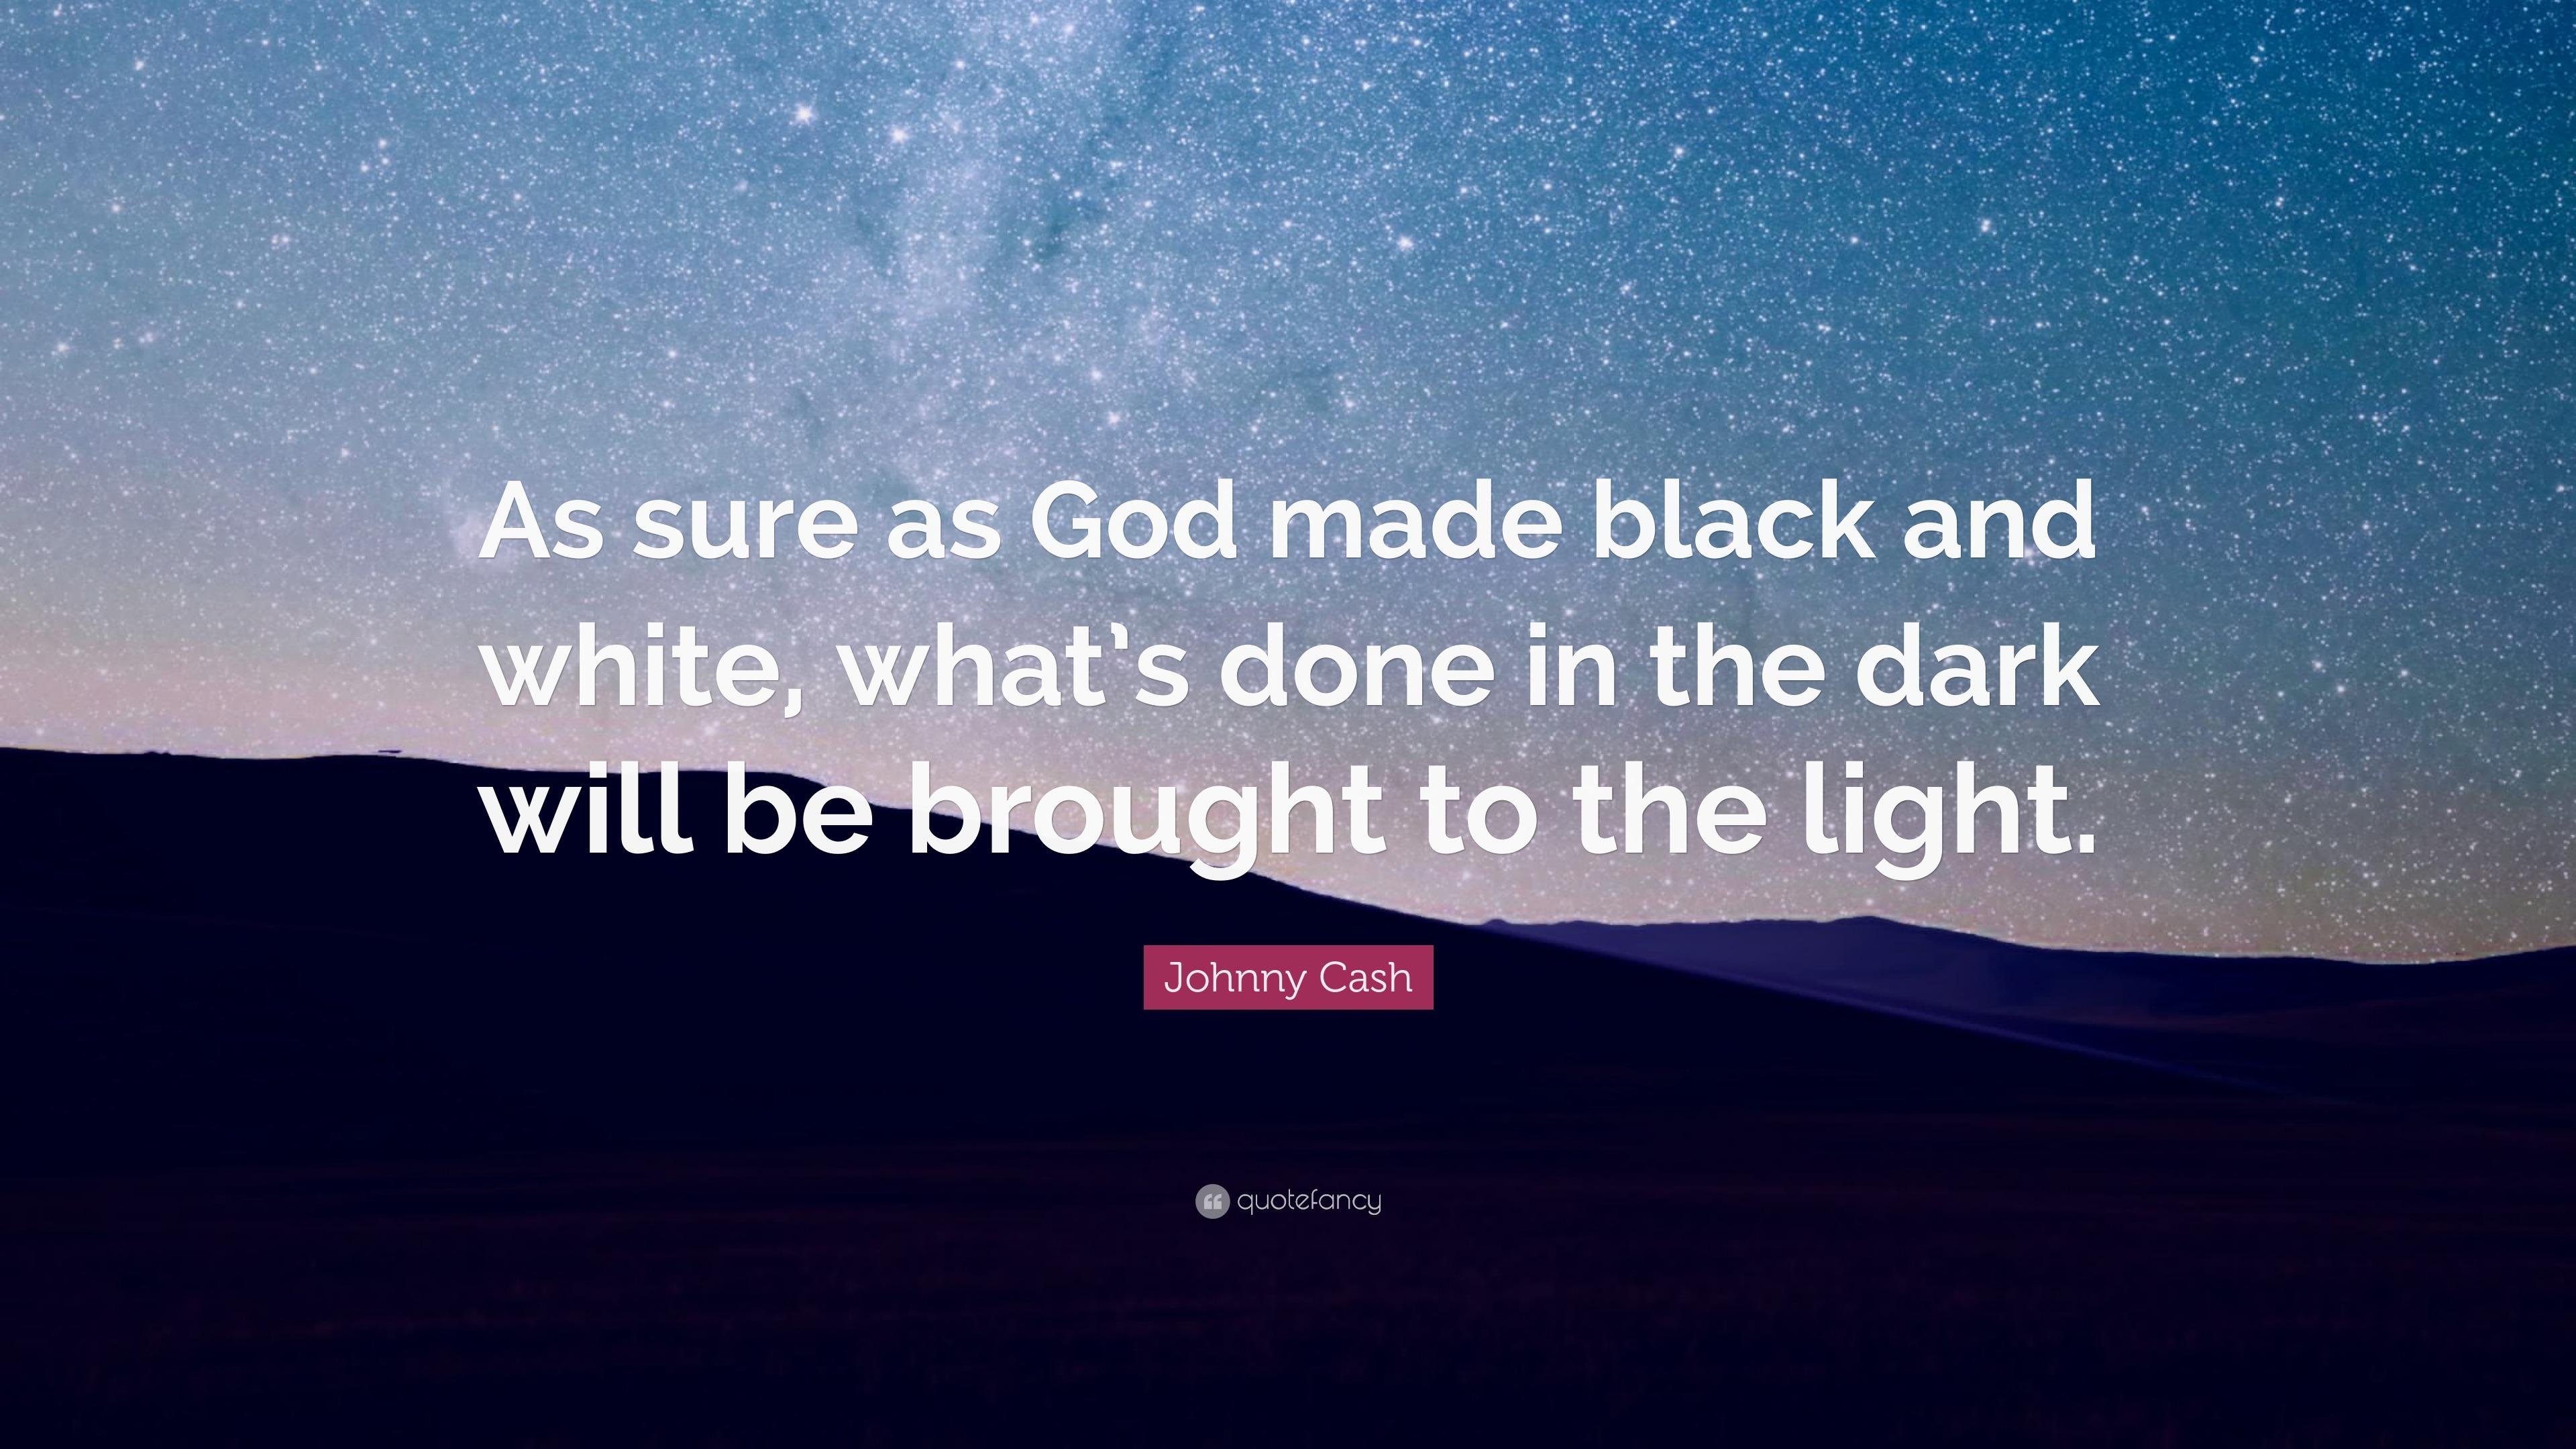 Johnny Cash Quote: “As Sure As God Made Black And White, What's Done In The Dark